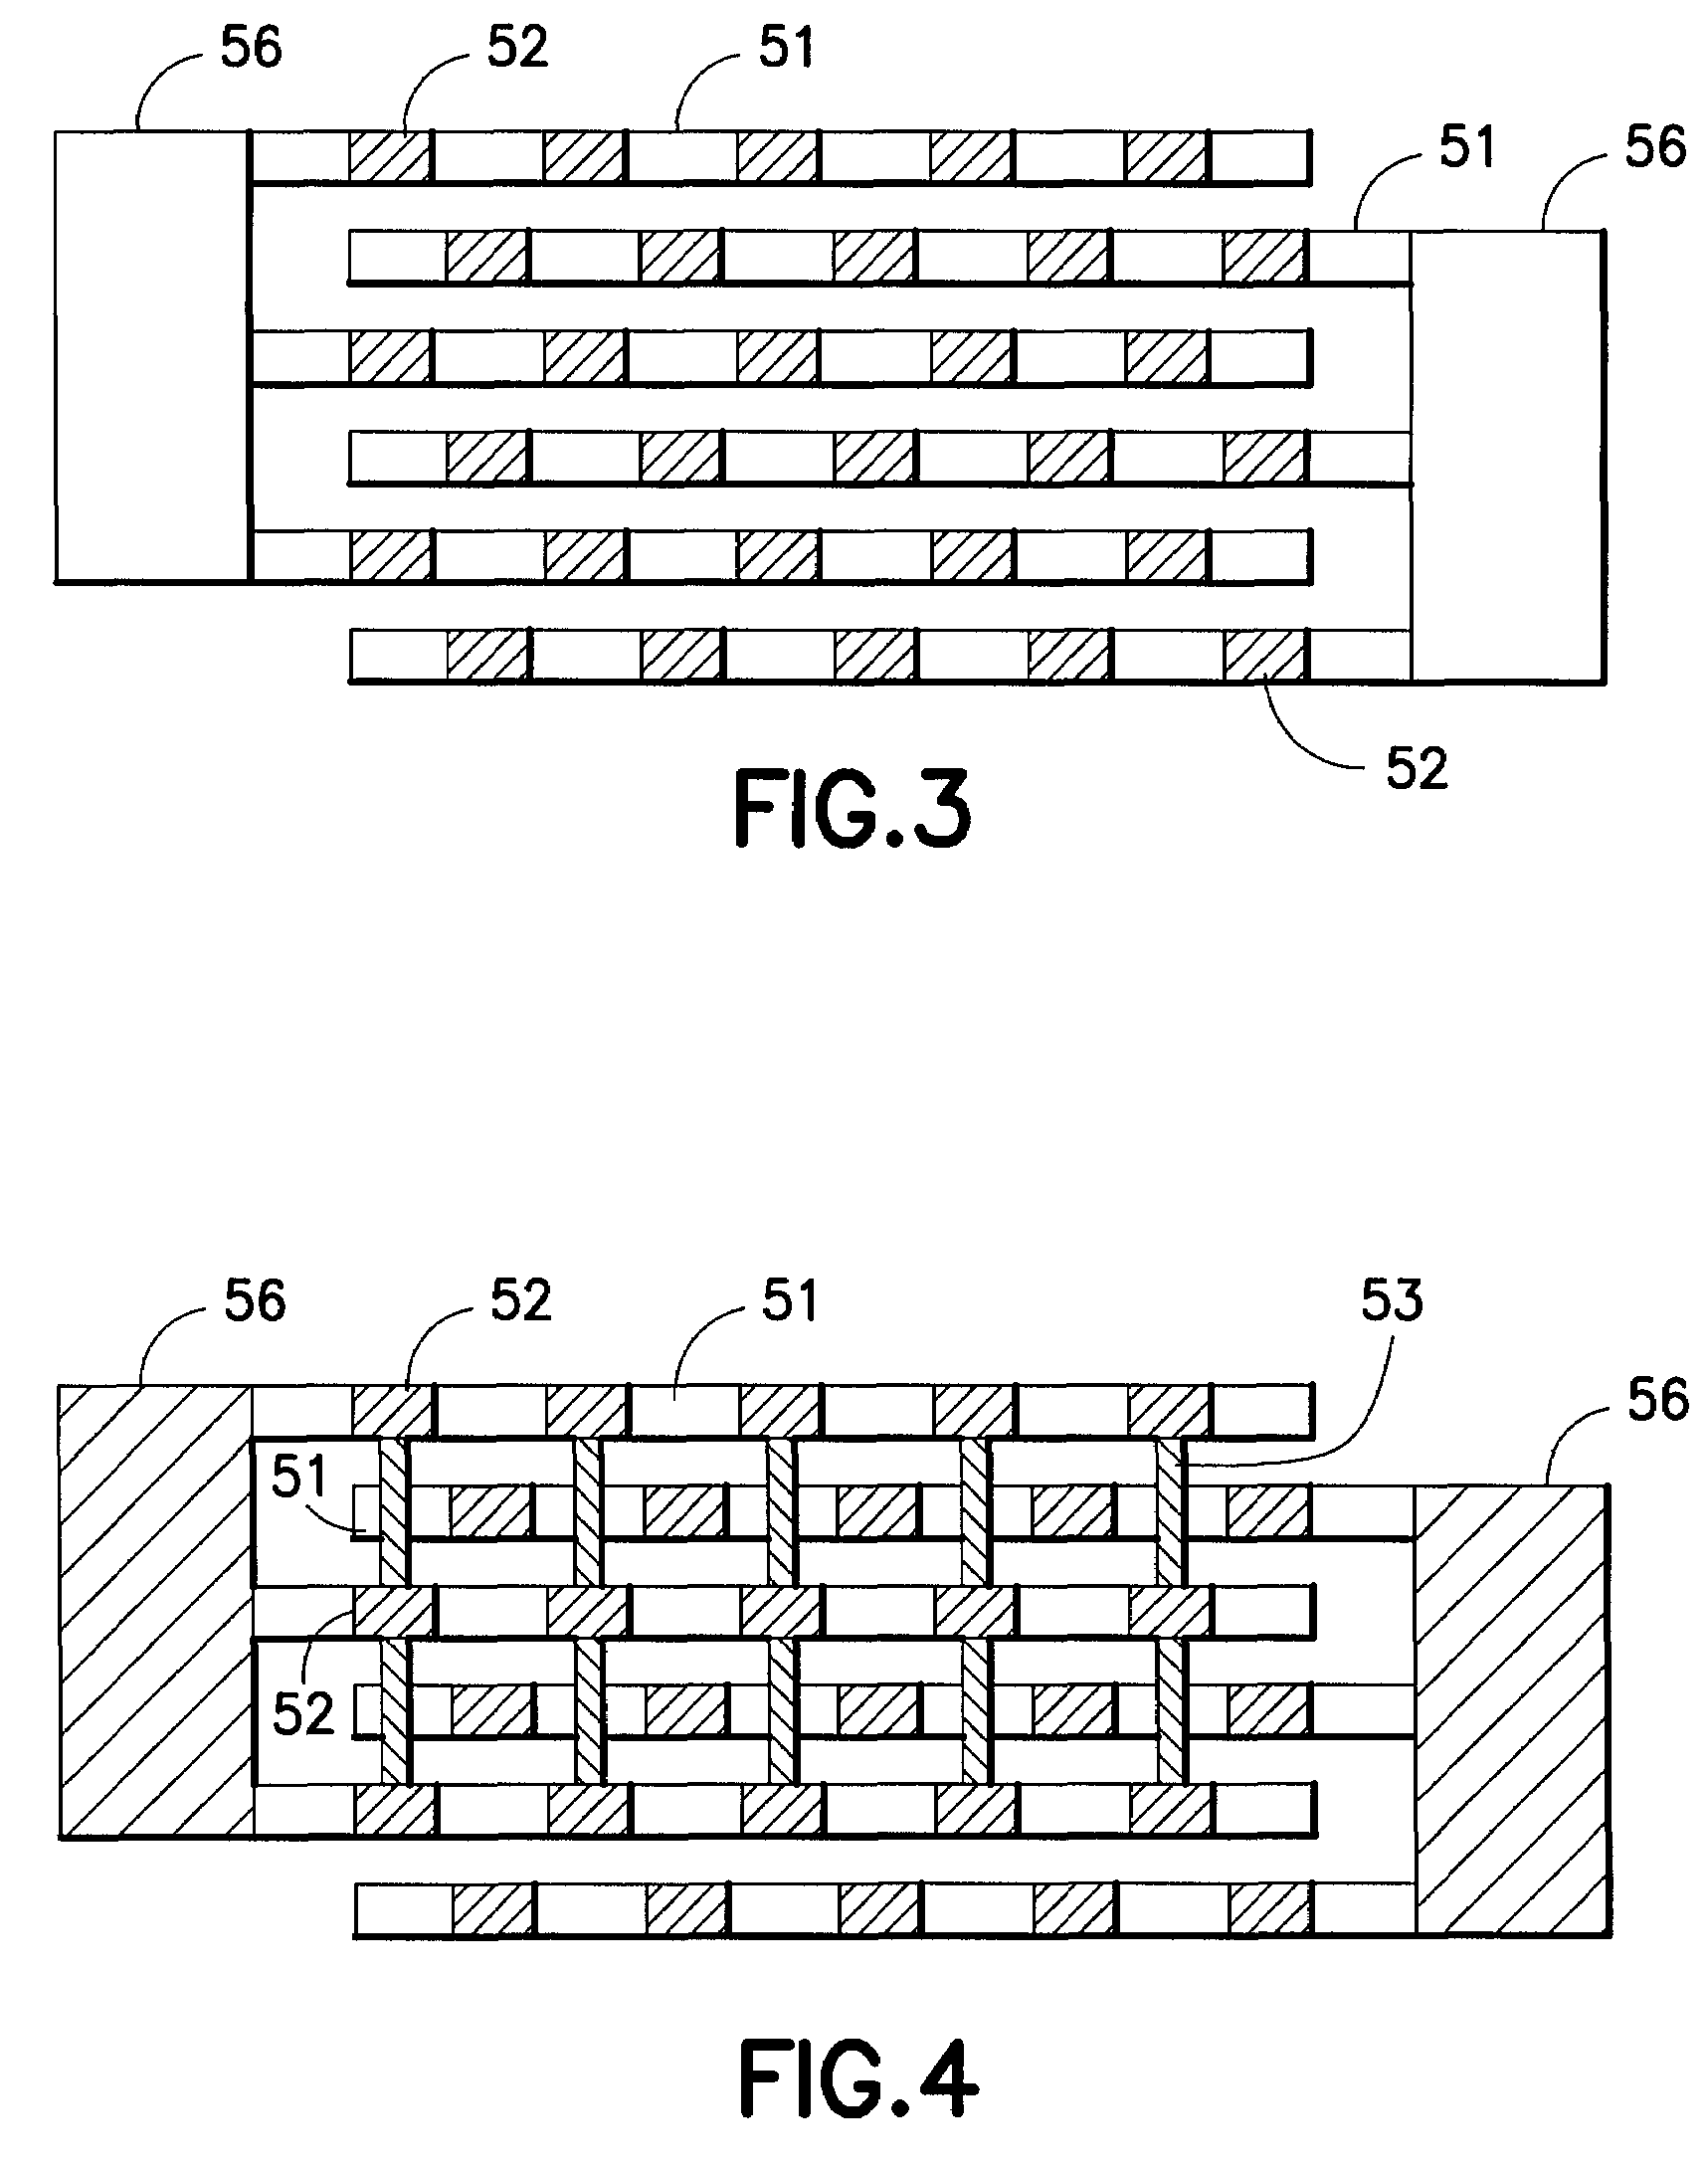 Integrated parallel plate capacitors